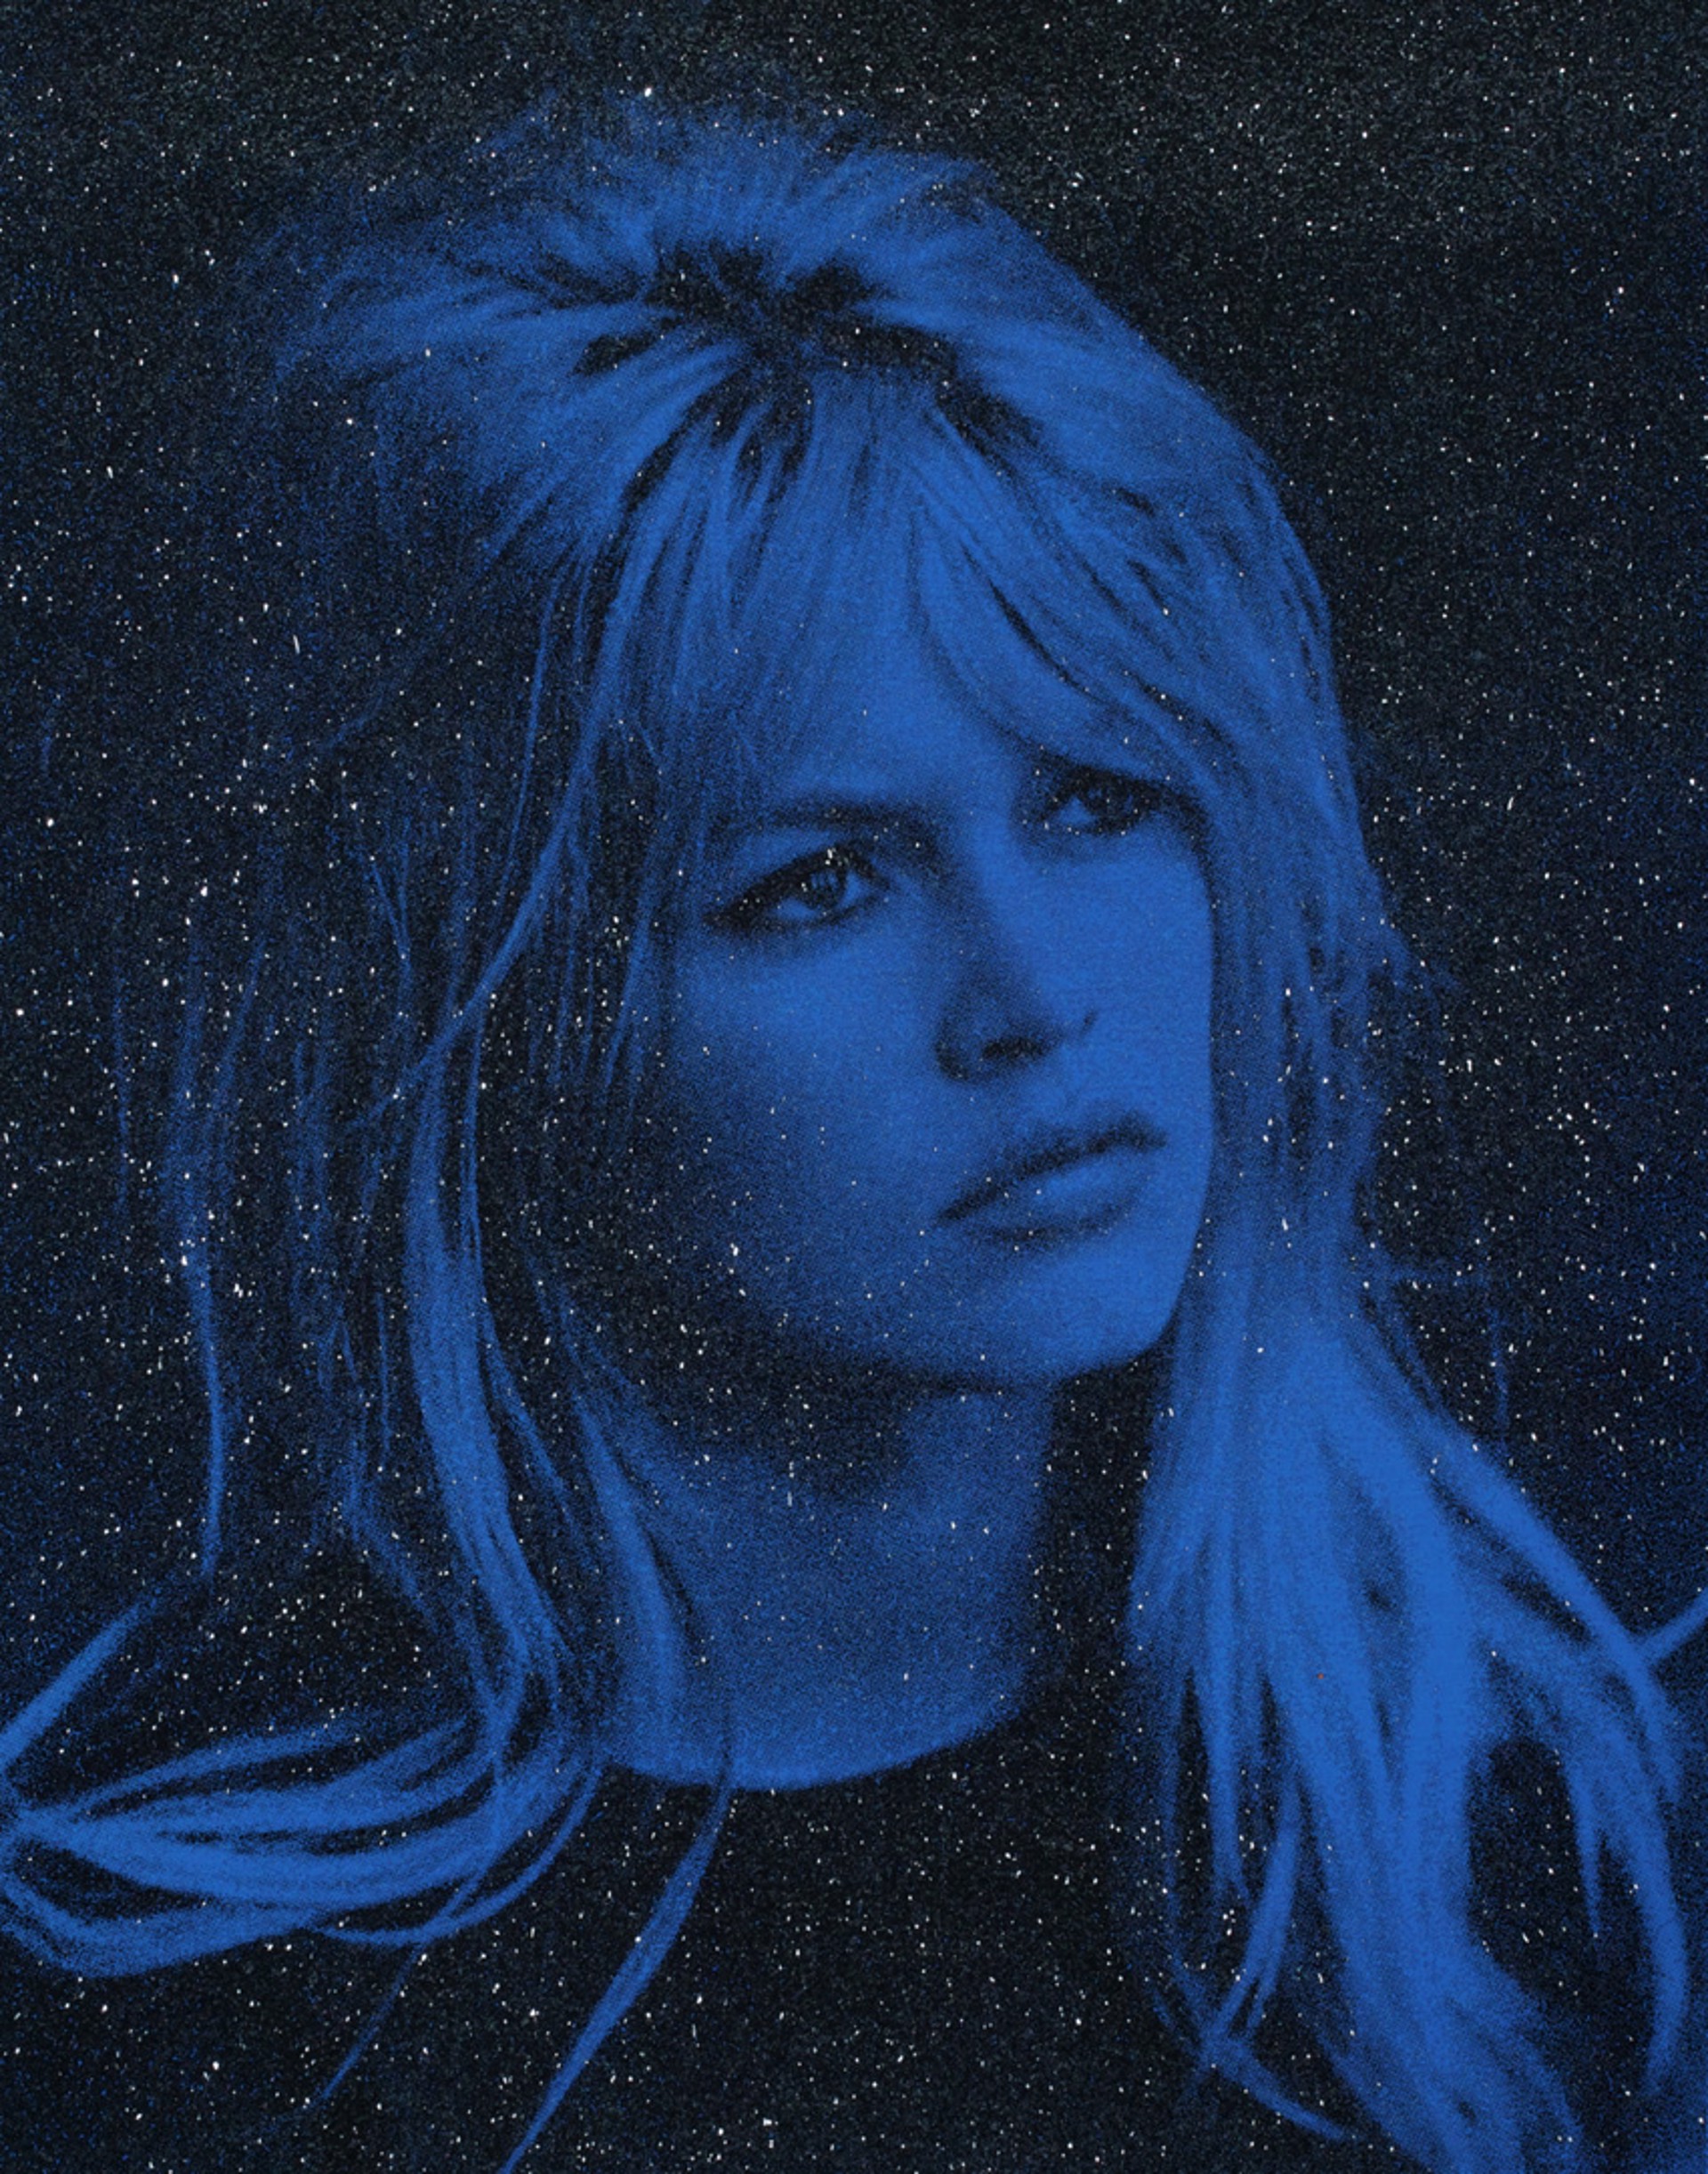 BARDOT-   St. Tropez Royal Bleu- Edition 9/13 by The White Room Gallery